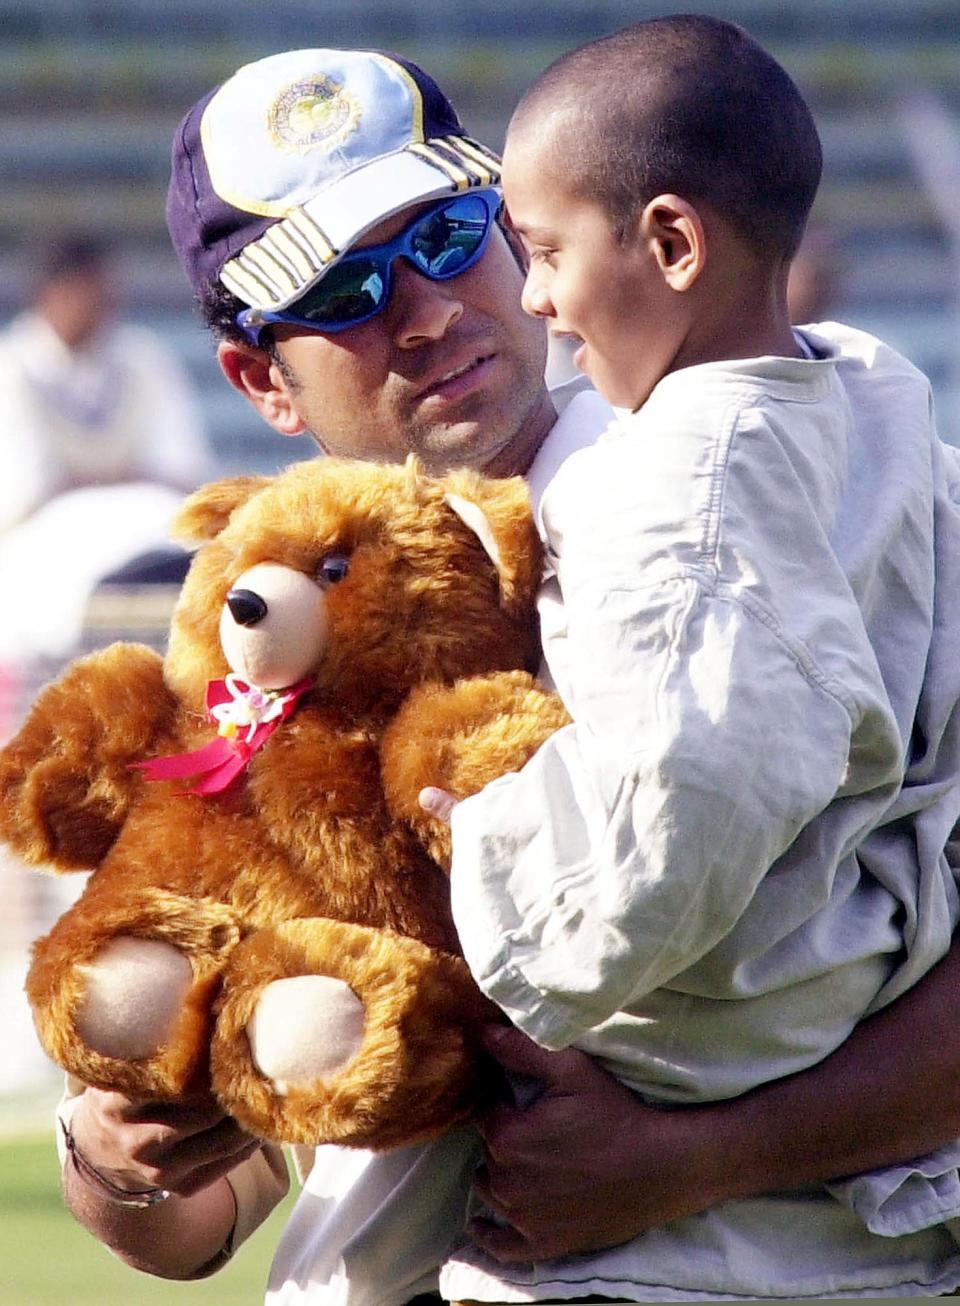 BOMBAY, INDIA: India's star batsman Sachin Tendulkar (L) holds six-year old cancer patient Ganesh Shankar 02 Febuary 2002 at Wankhade Stadium in Bombay. Shankar will undergo major surgery to remove a tumor from behind his right eye. India will play England in the last of six one-day internationals 03 February. AFP PHOTO / Sebastian D'SOUZA (Photo credit should read SEBASTIAN D'SOUZA/AFP/Getty Images)